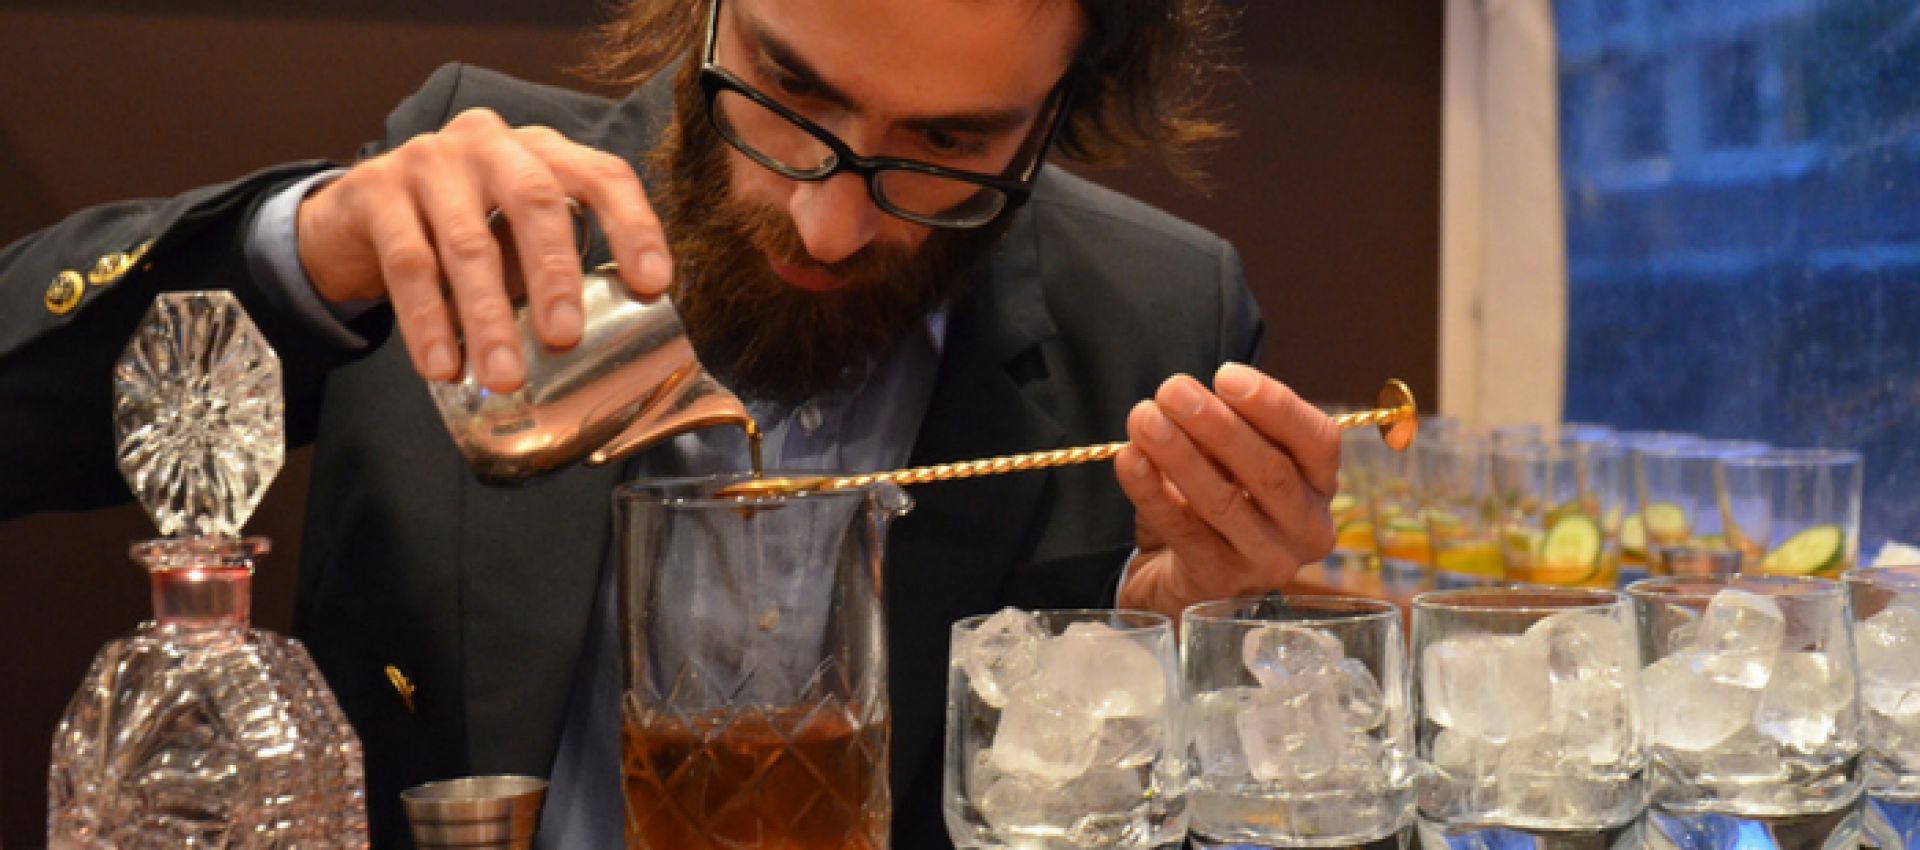 Photo for: 30 Best Cities in the U.S. for Bartenders